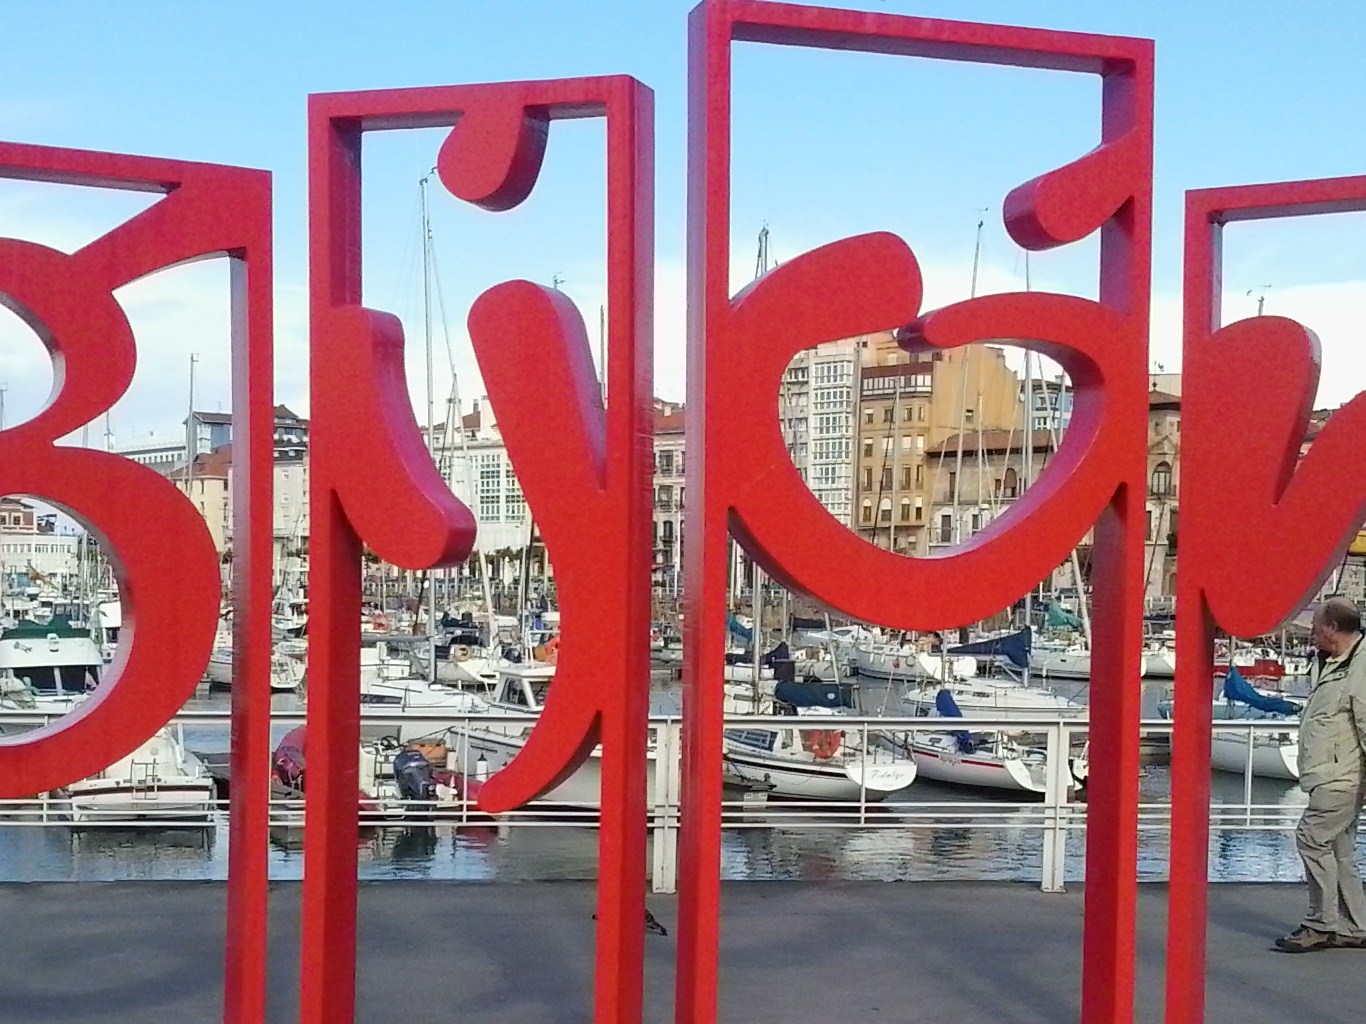 Gijón: The famous red-letter Gijón sign. Nowhere like the coastal beauty of this tranquil paradise. And Sporting in La Primera again!